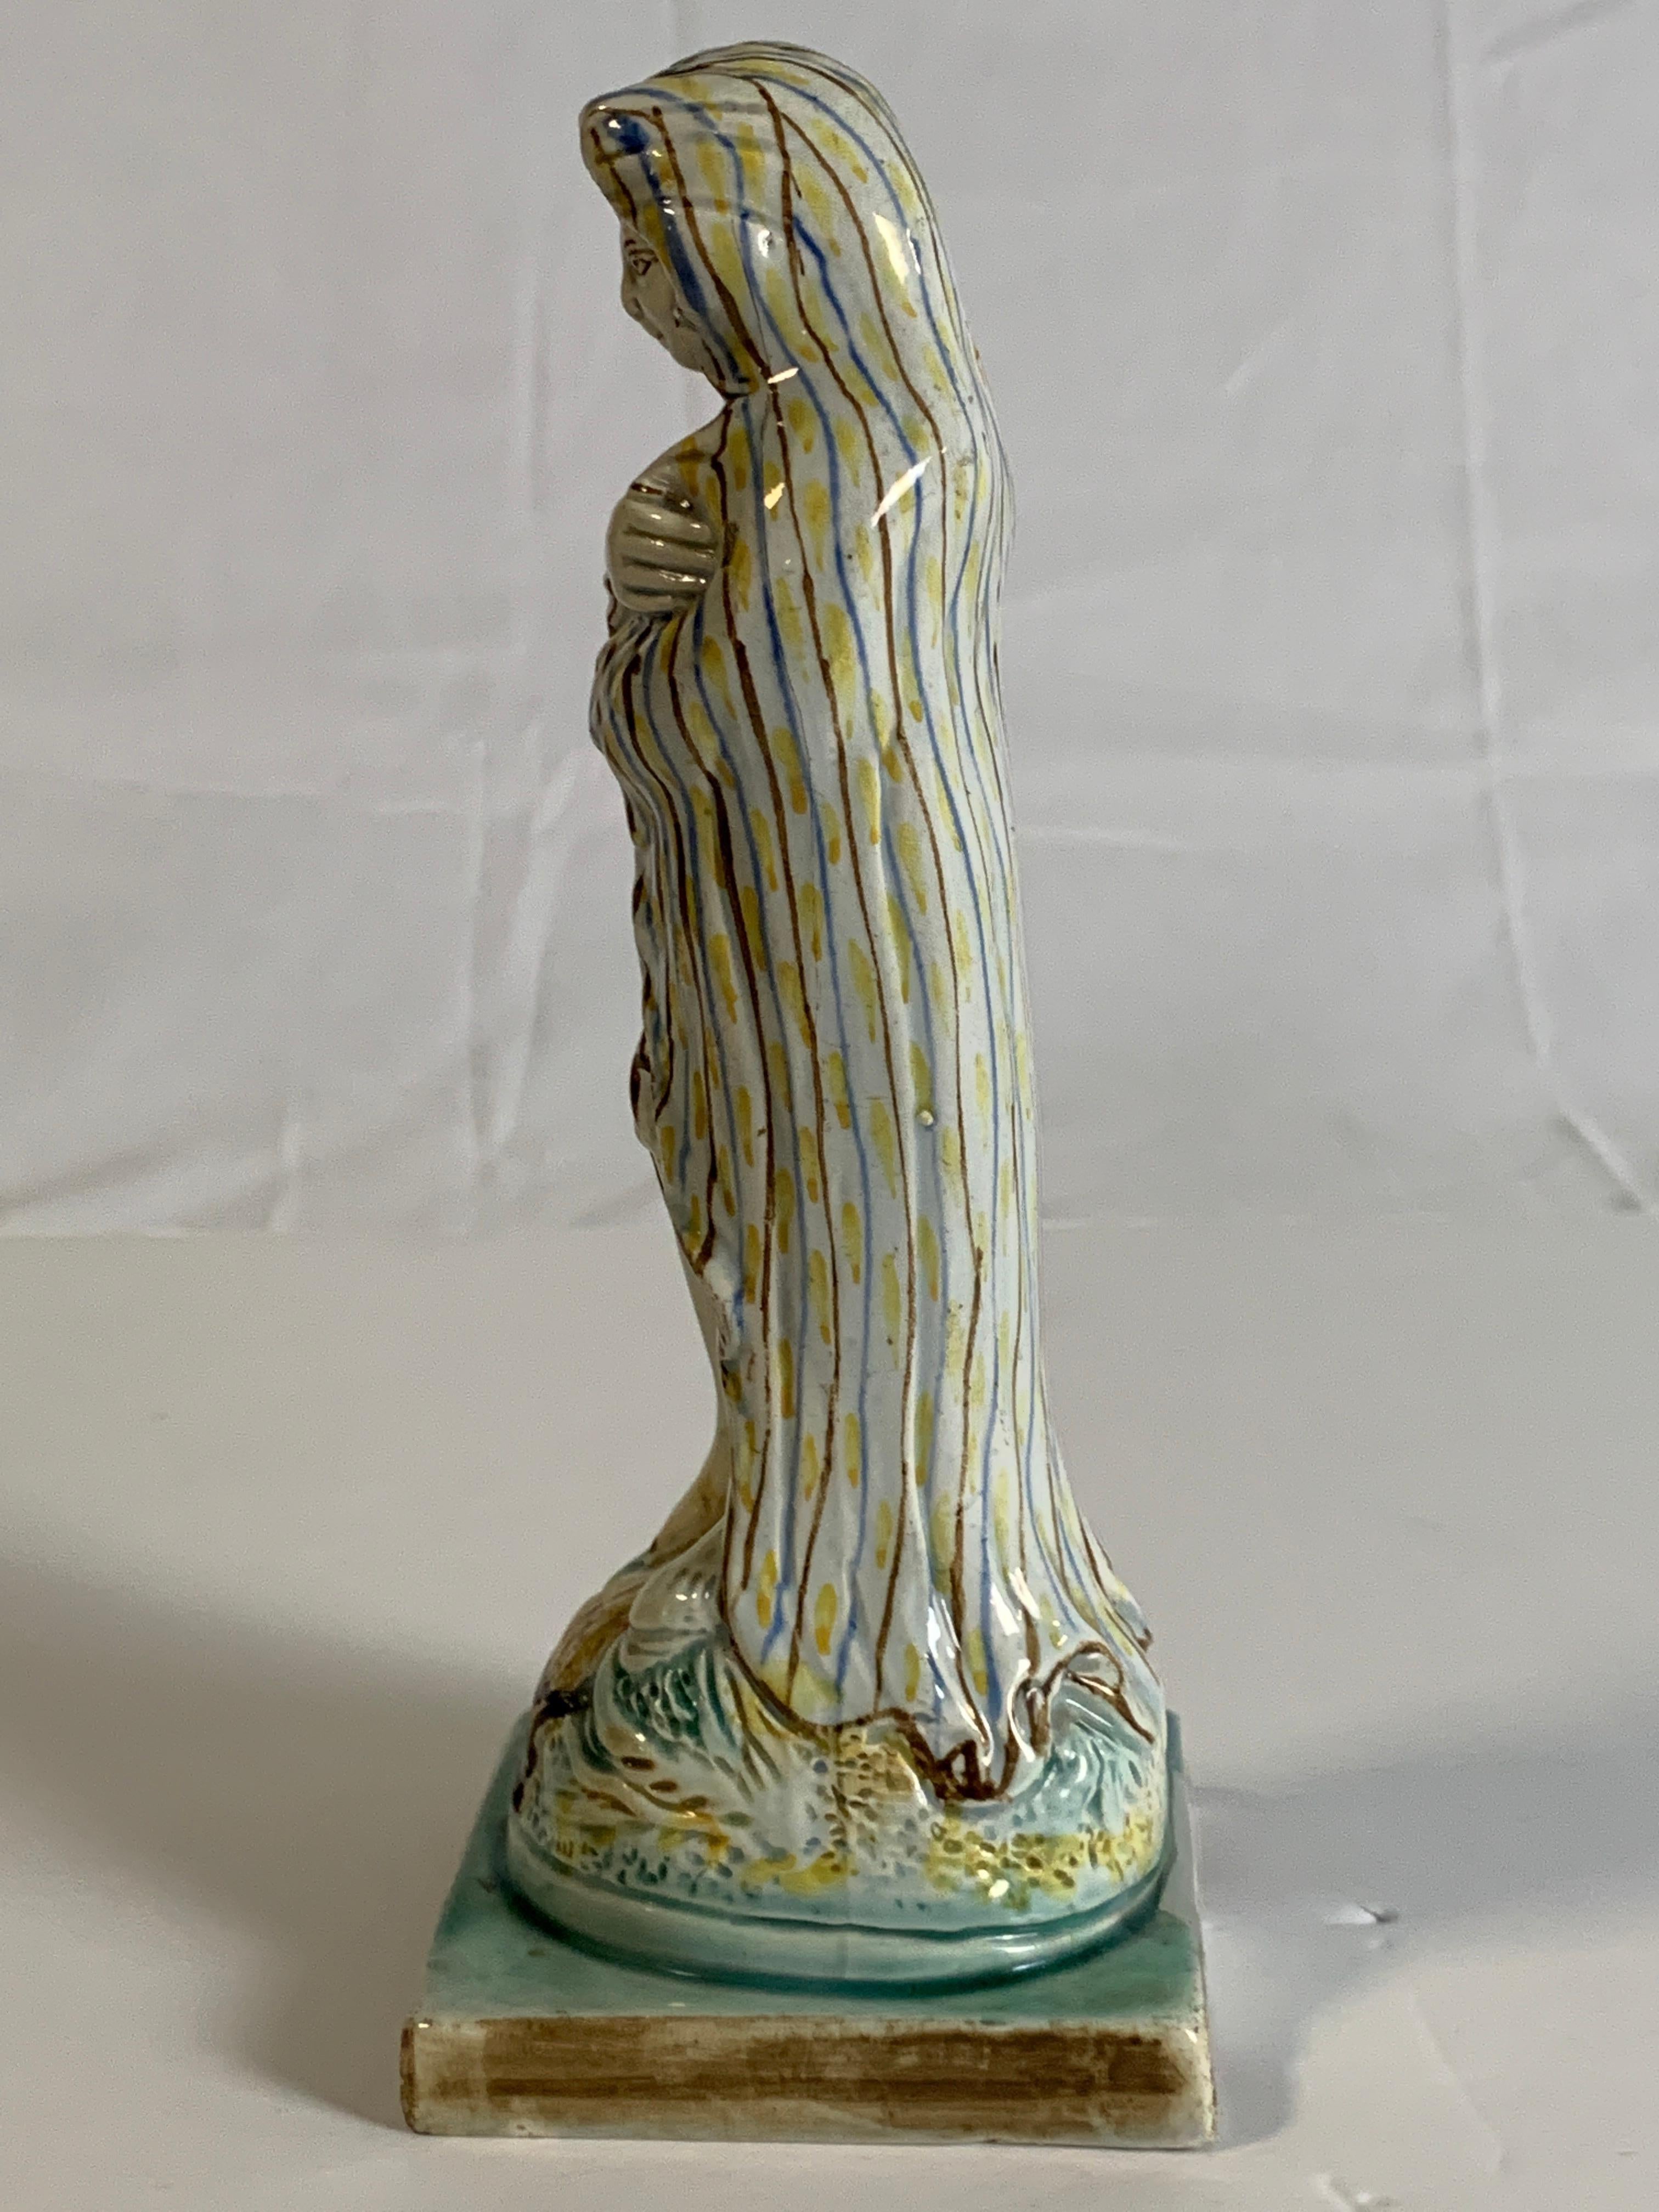 We are pleased to offer this naive and charming 18th century creamware figure of a woman personifying winter. Modeled standing on a plinth she wraps herself in a hooded cloak hand-painted with light brown and light blue stripes and spots of yellow.